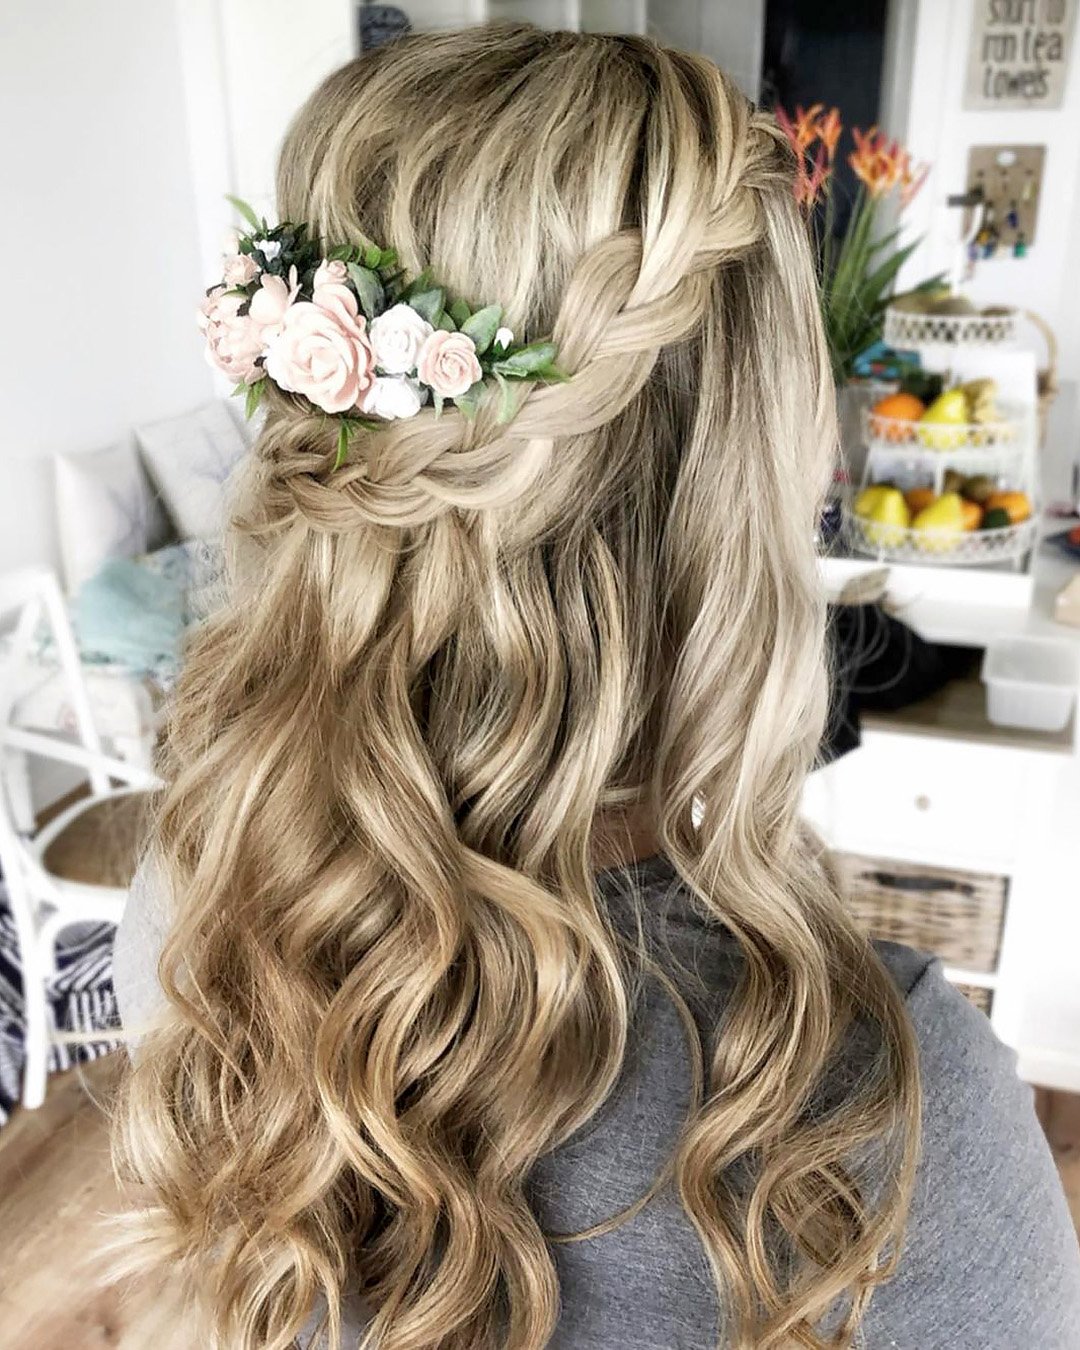 34. Sparkly Texture Braid Long Hair With Flower